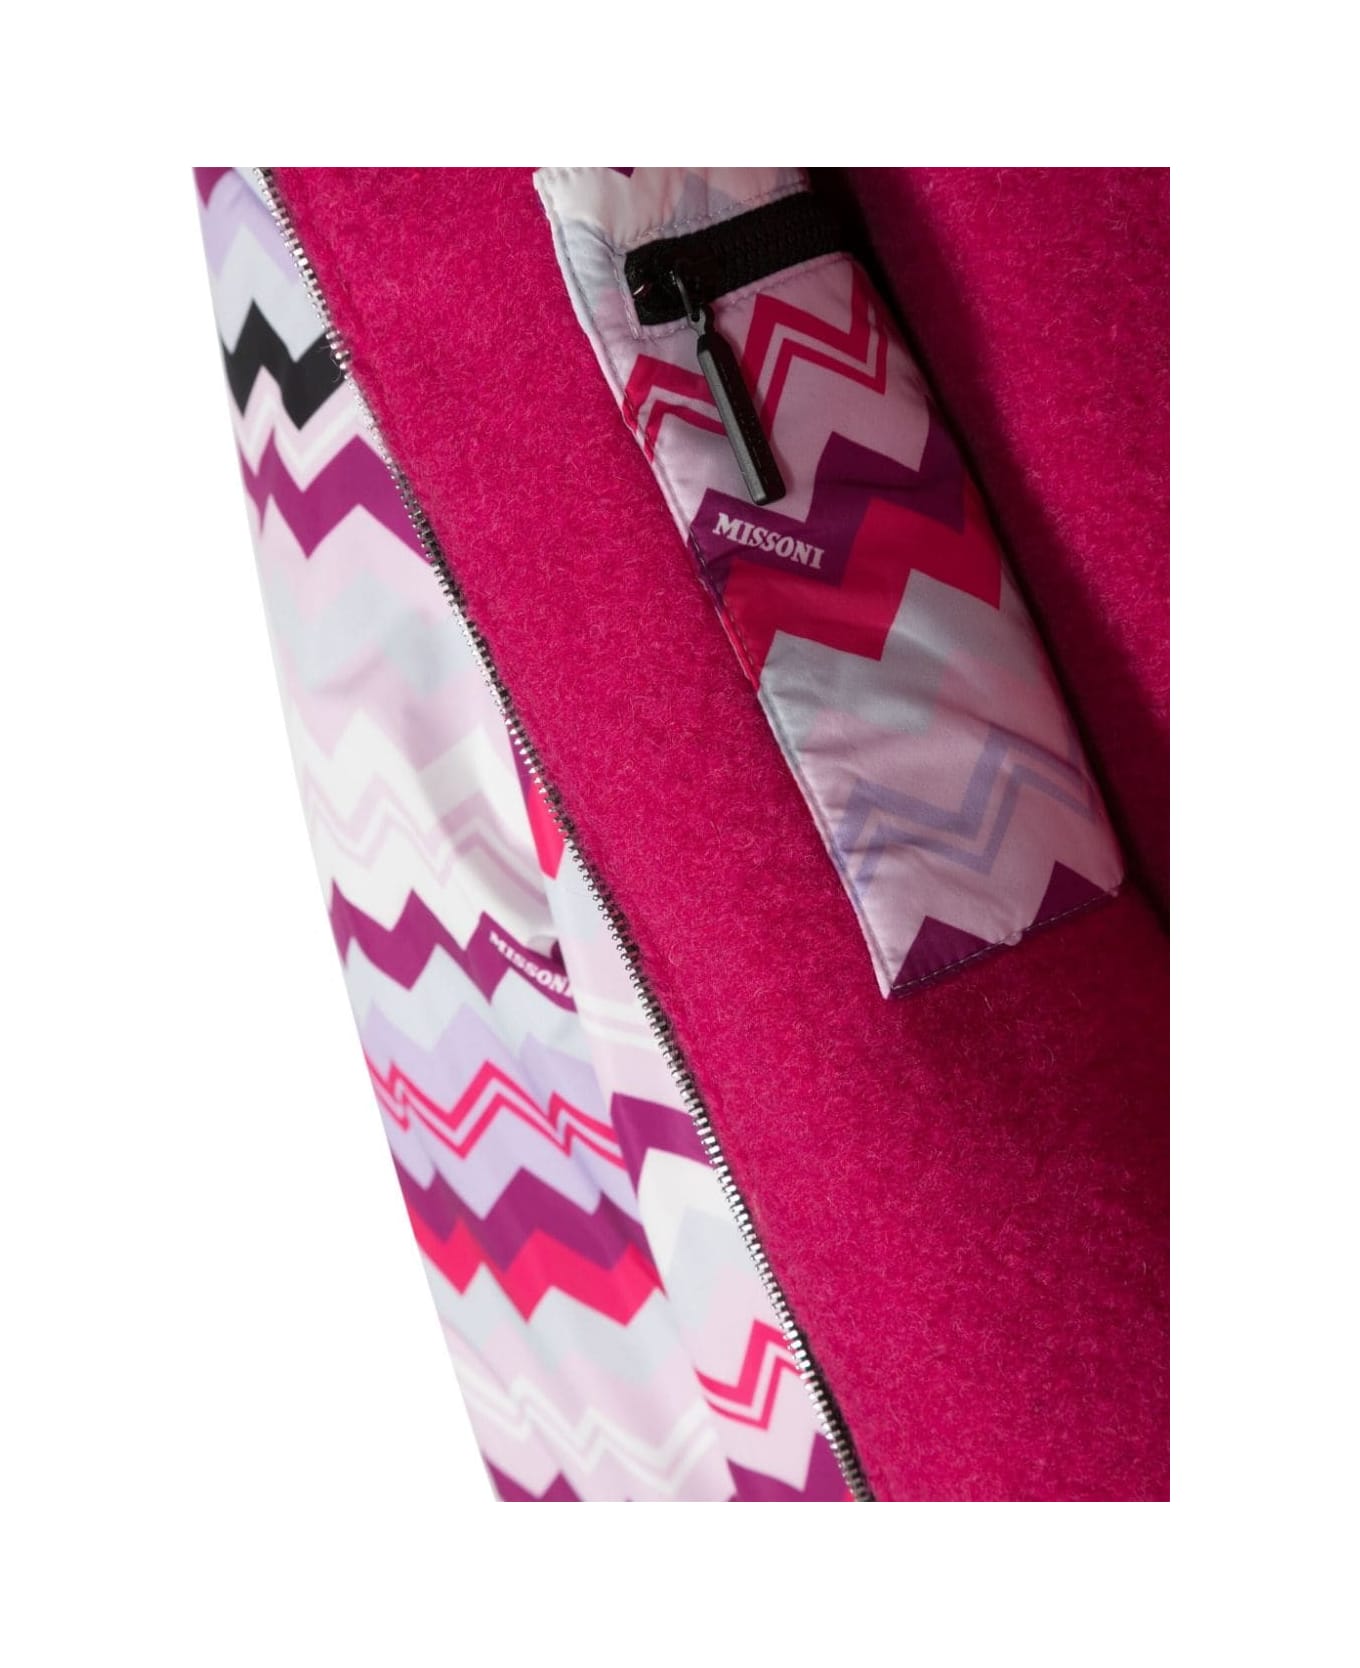 Missoni Kids Pink And Fuchsia Reversible Jacket With Chevron Pattern - MULTICOLOR